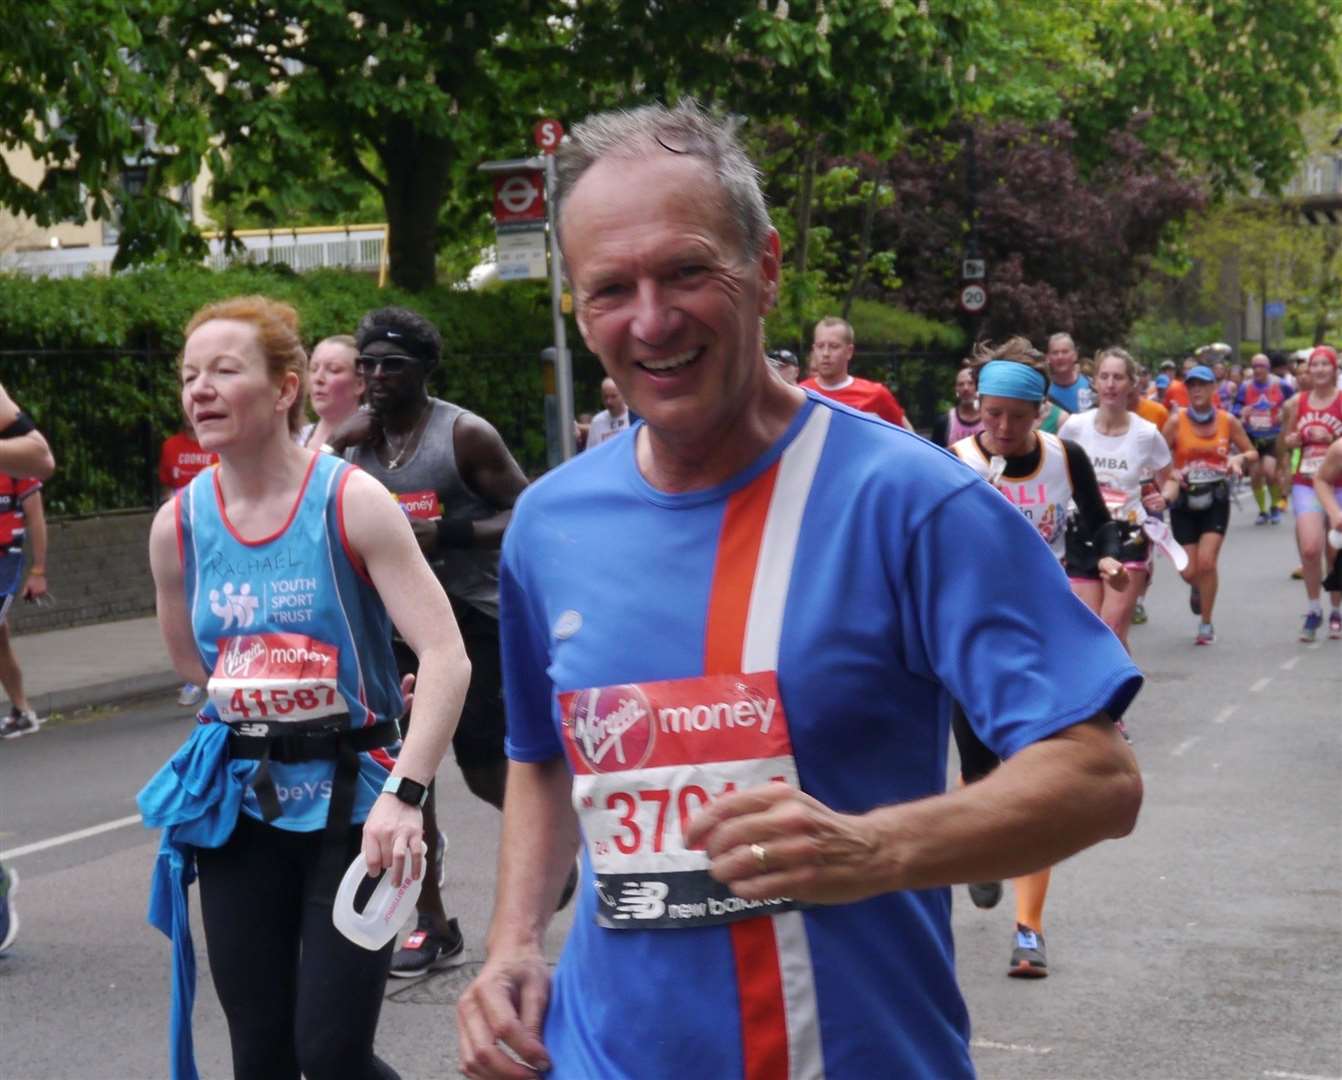 Ray Johnson completed his 19th London Marathon in a row last year